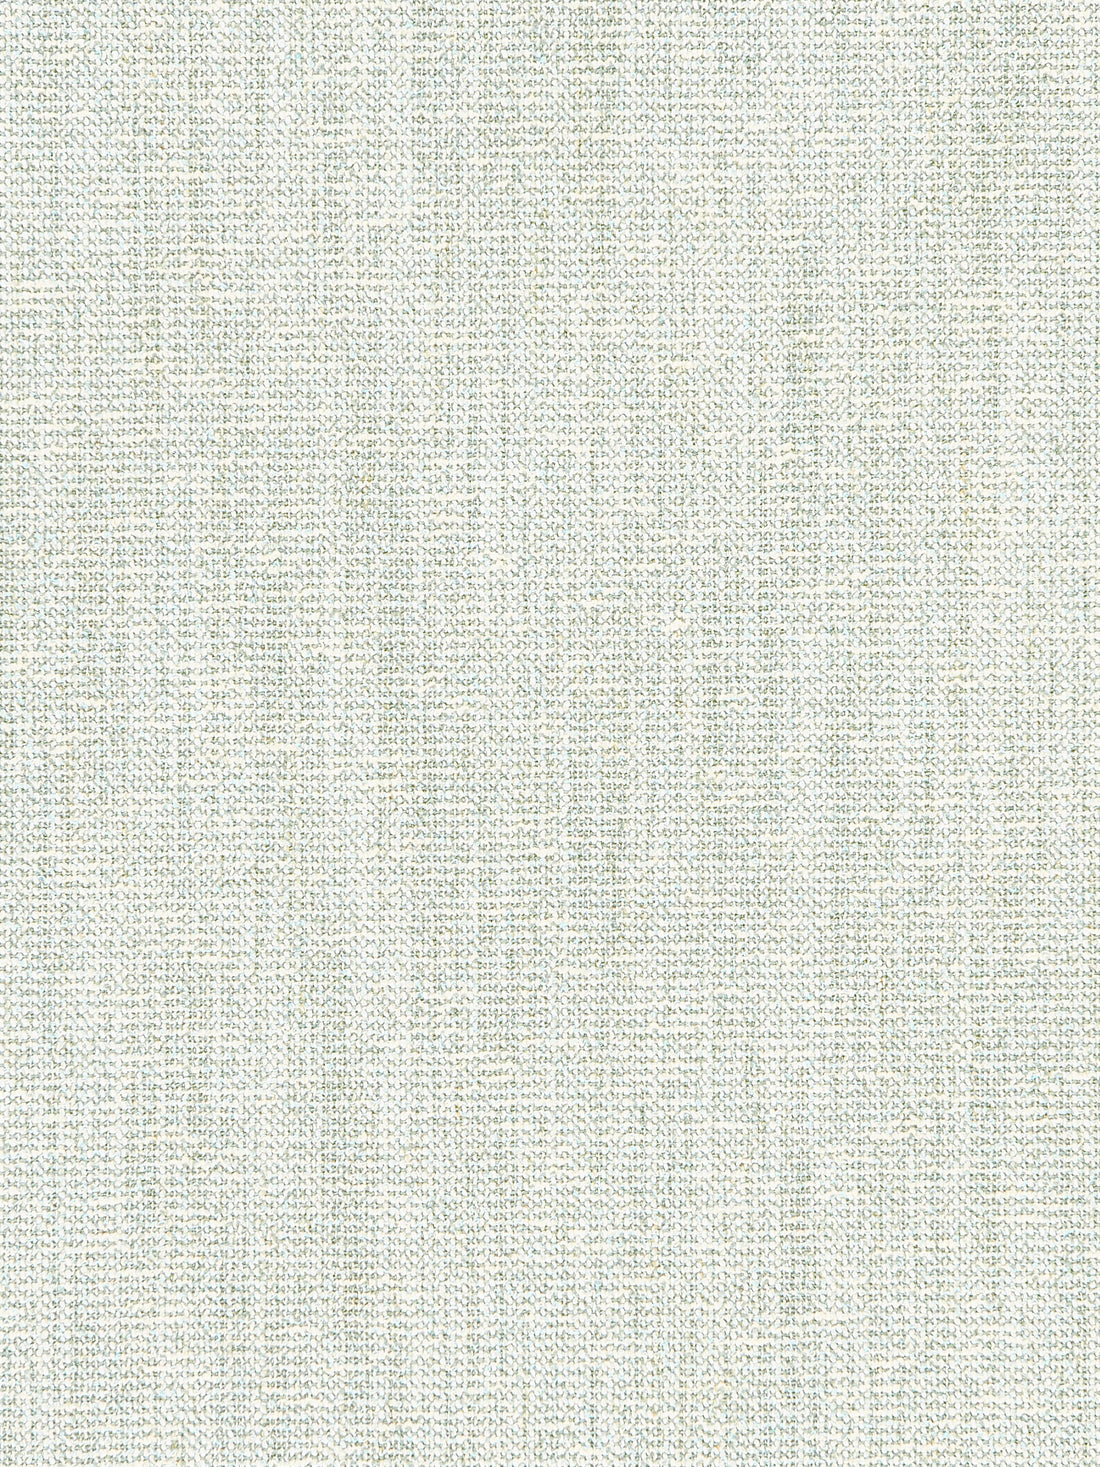 Haiku Weave fabric in mist color - pattern number SC 000227240 - by Scalamandre in the Scalamandre Fabrics Book 1 collection